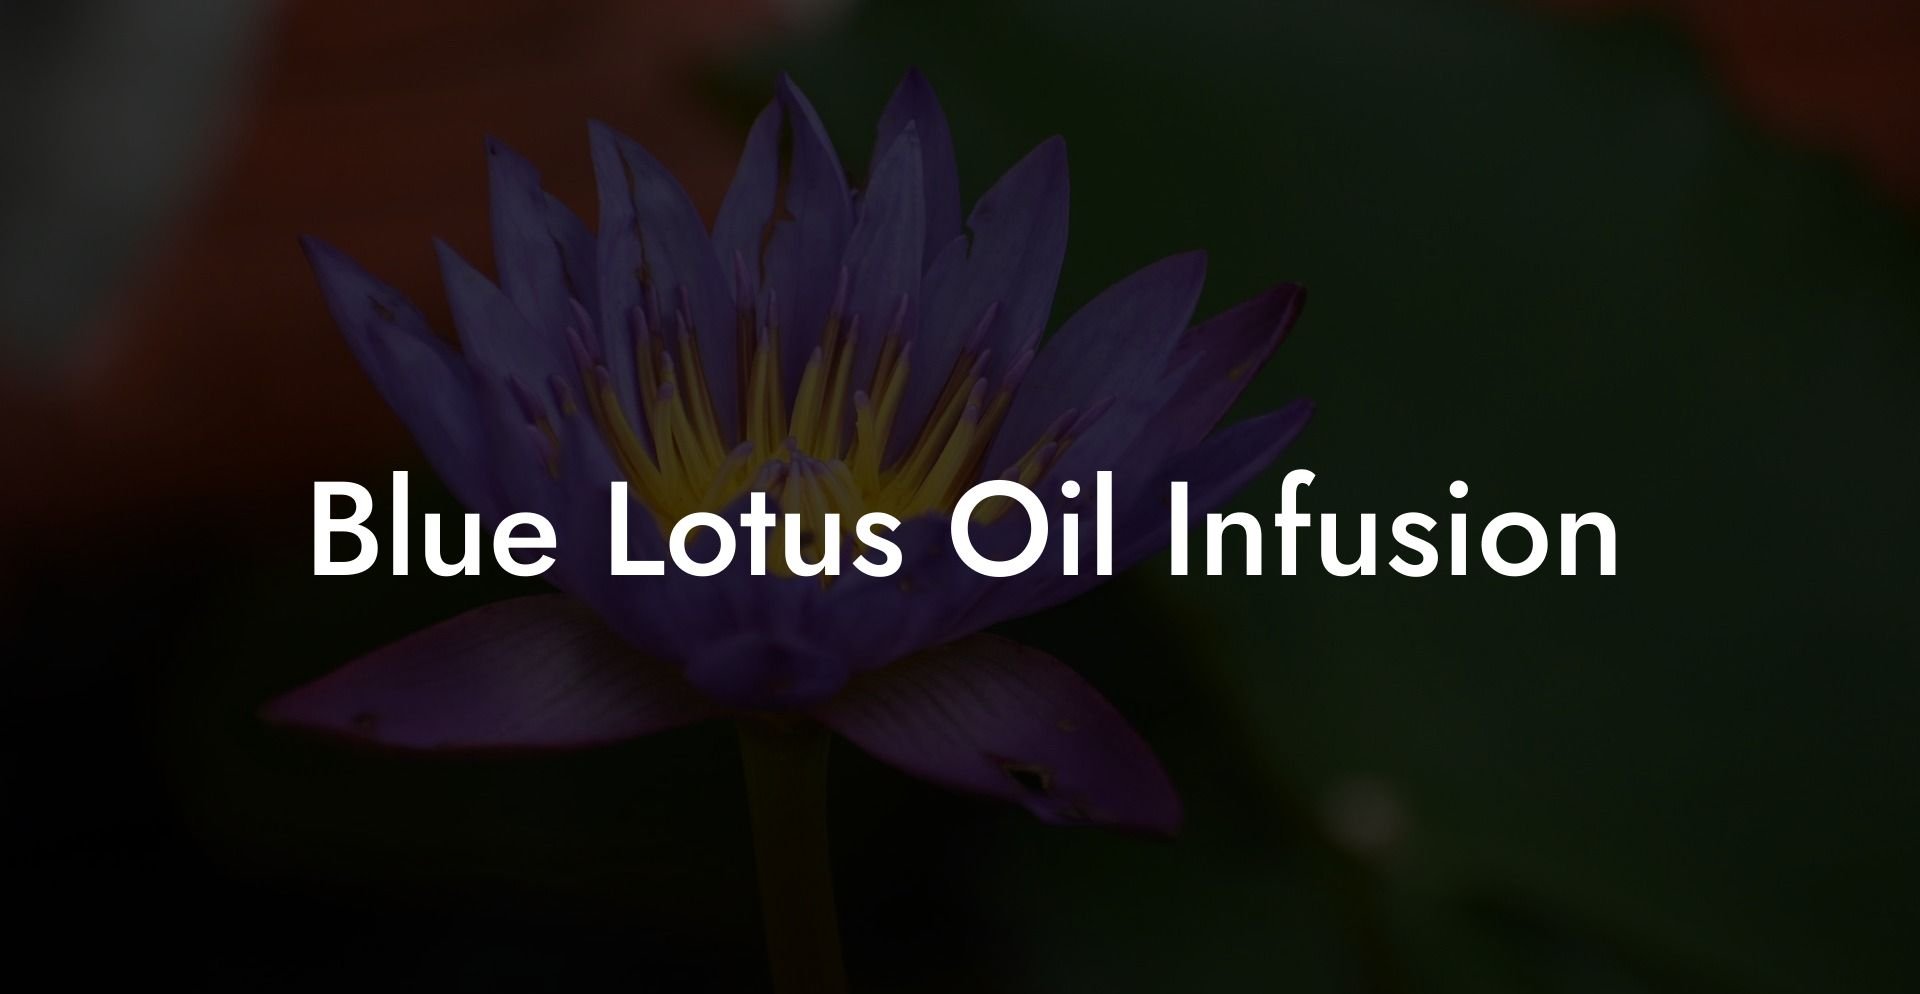 Blue Lotus Oil Infusion